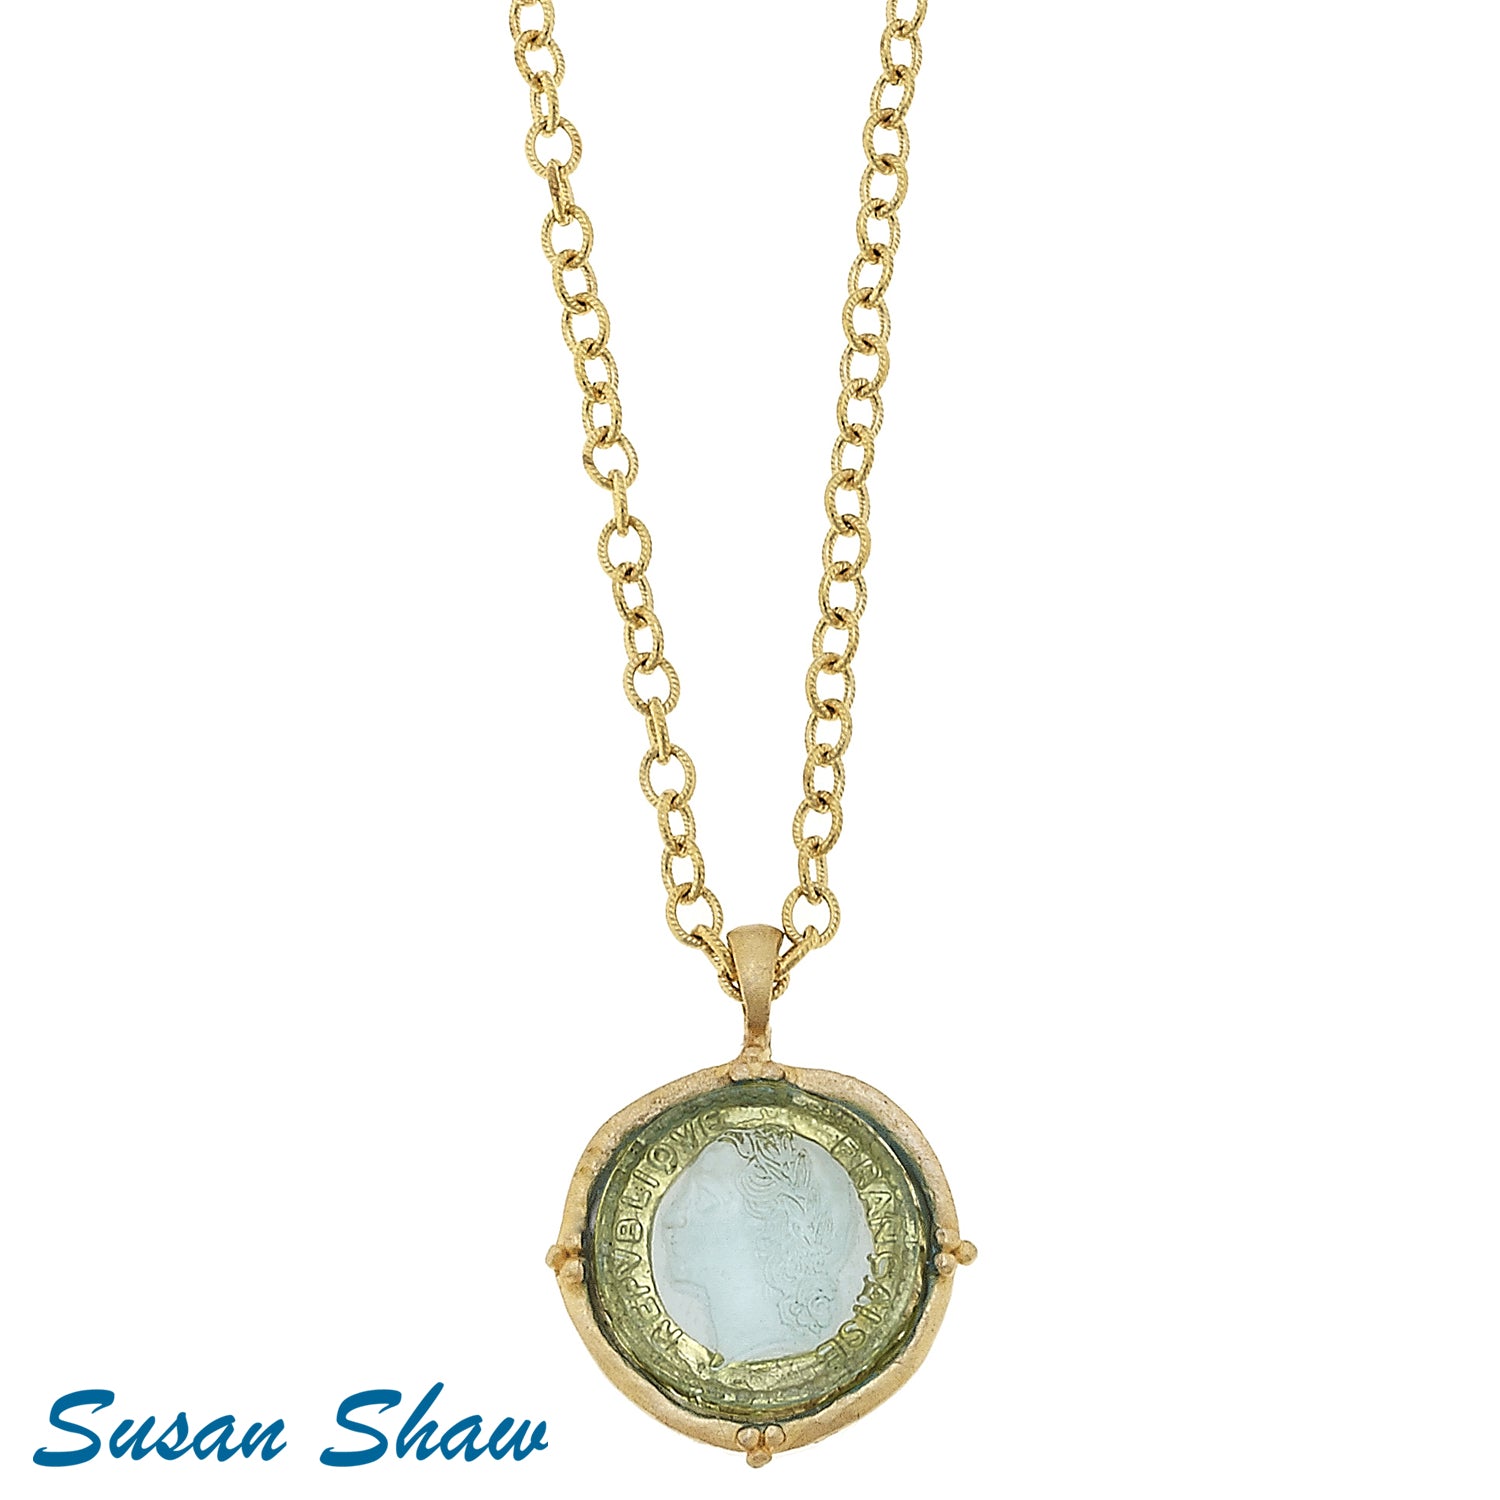 Susan Shaw 30" Clear Venetian Glass Coin on Chain Necklace